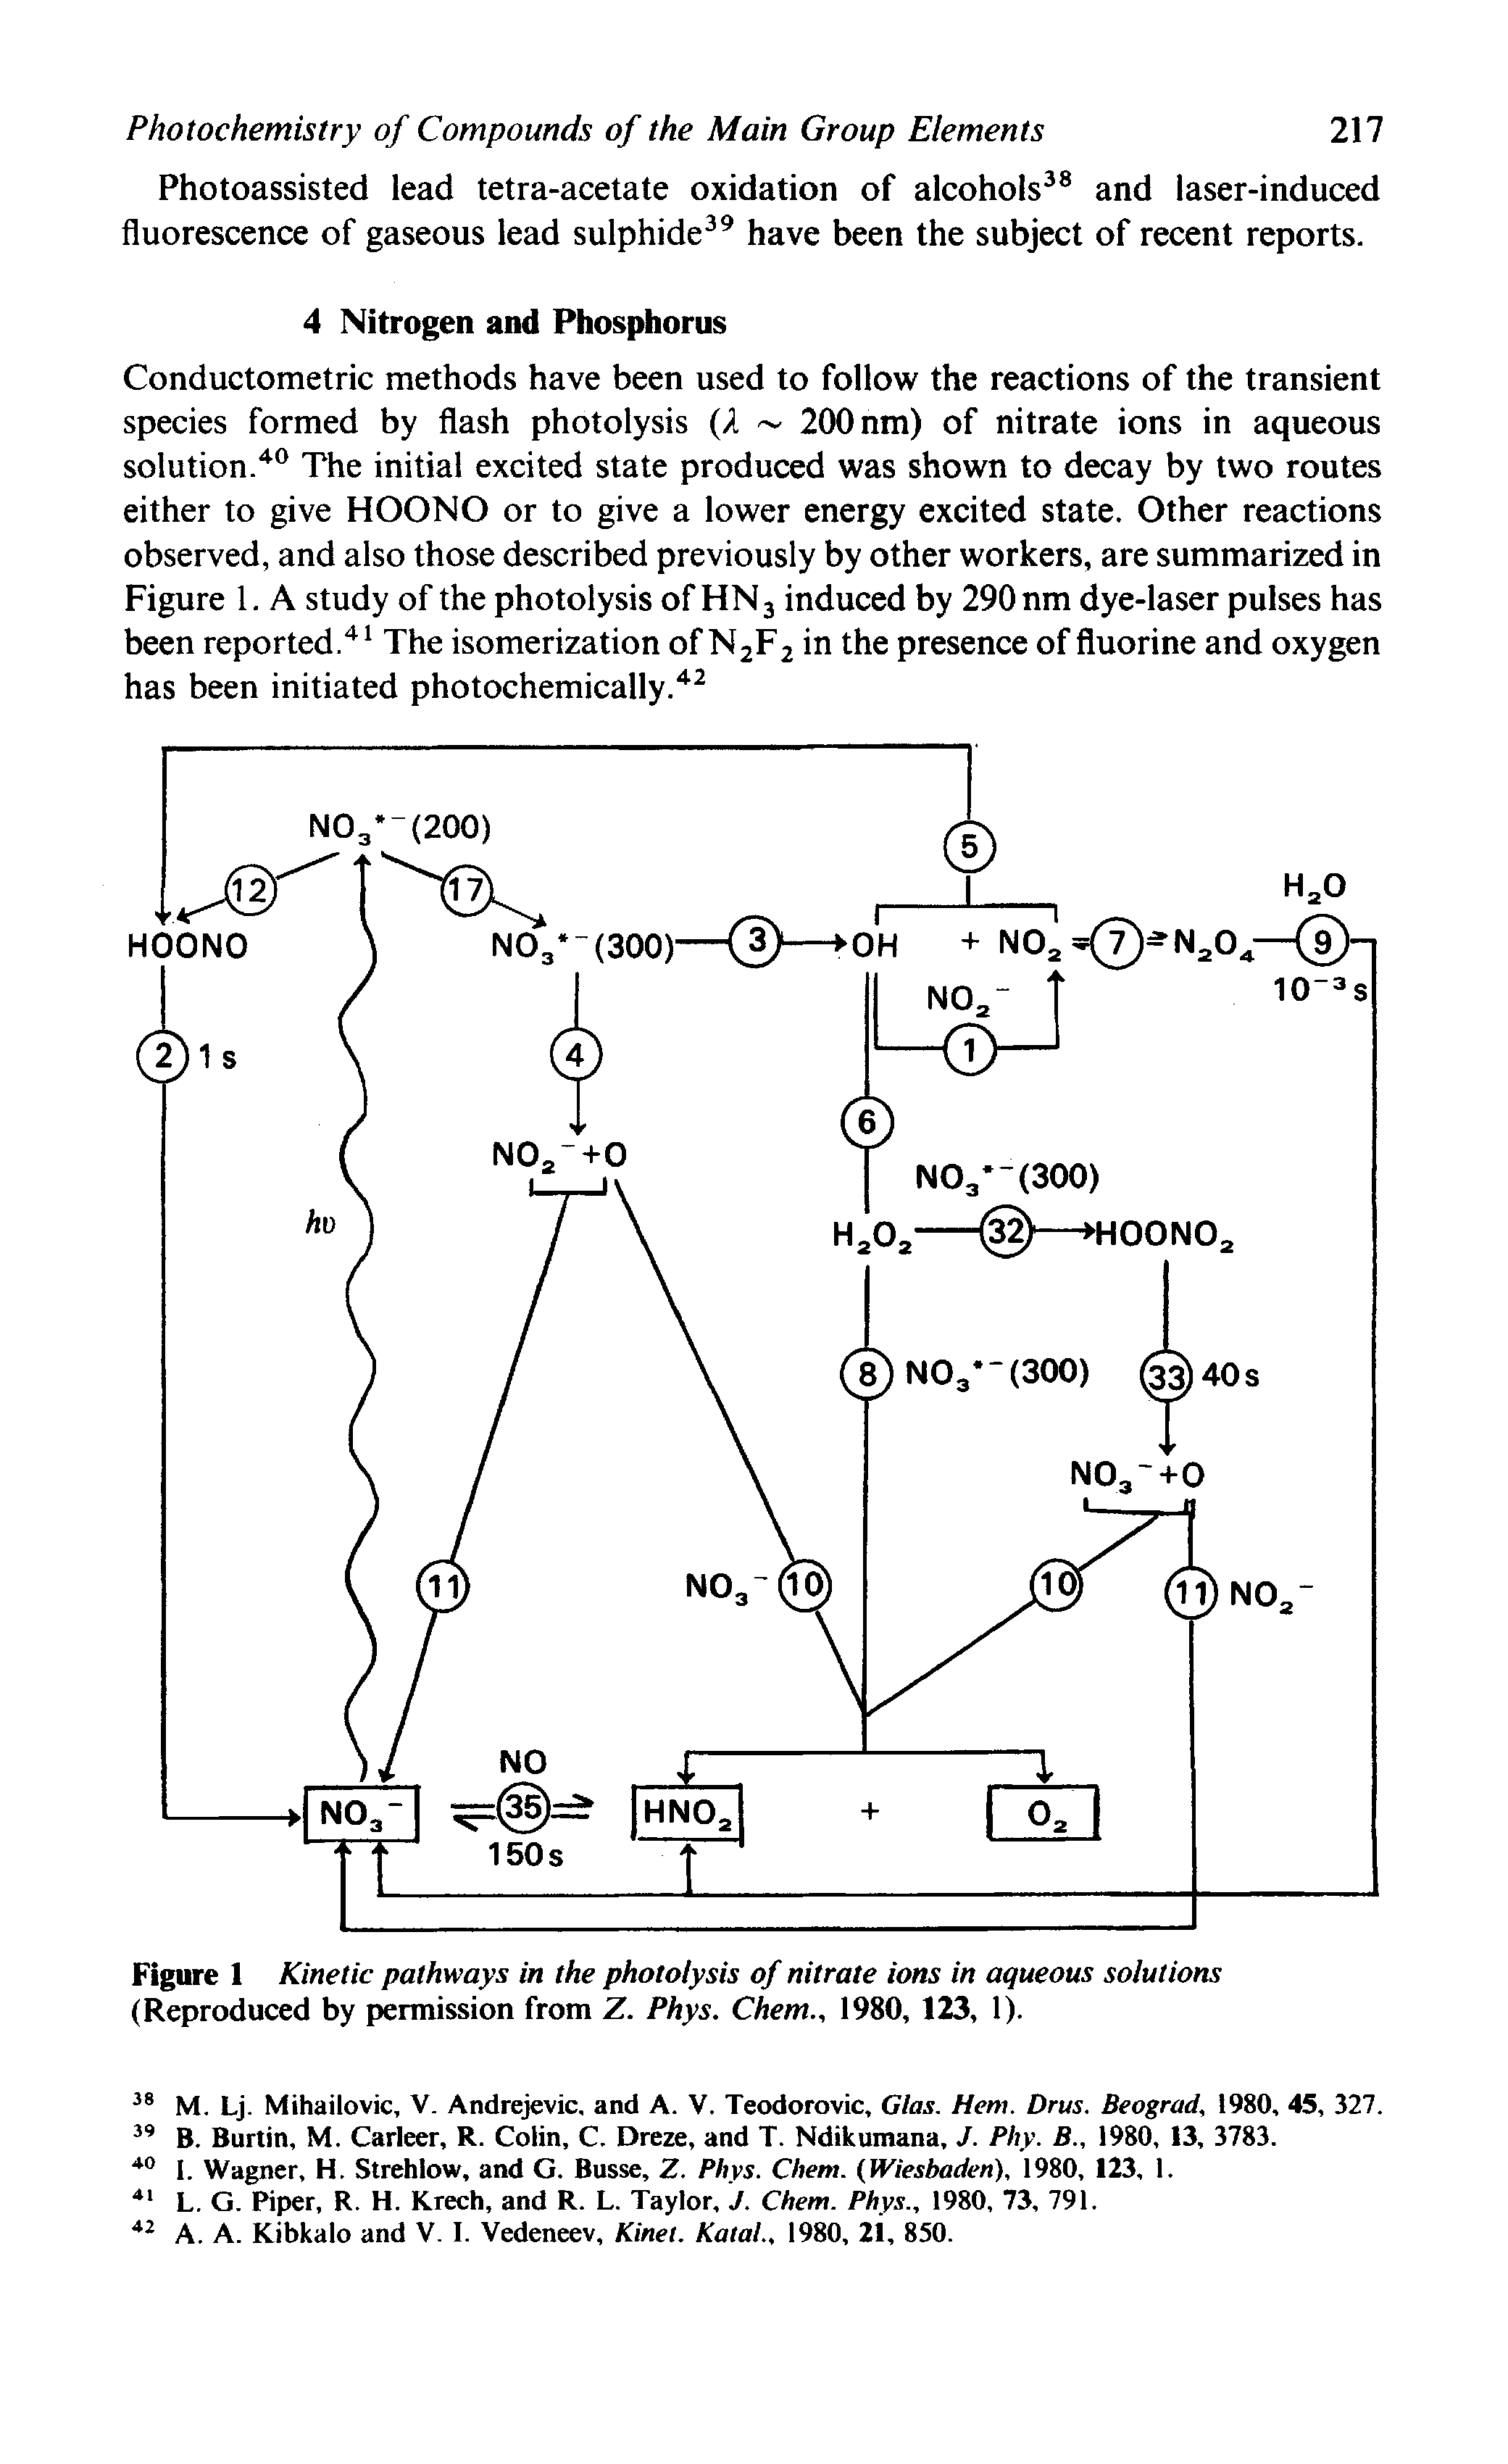 Figure 1 Kinetic pathways in the photolysis of nitrate ions in aqueous solutions (Reproduced by permission from Z. Phys. Chem., 1980, 123, 1).